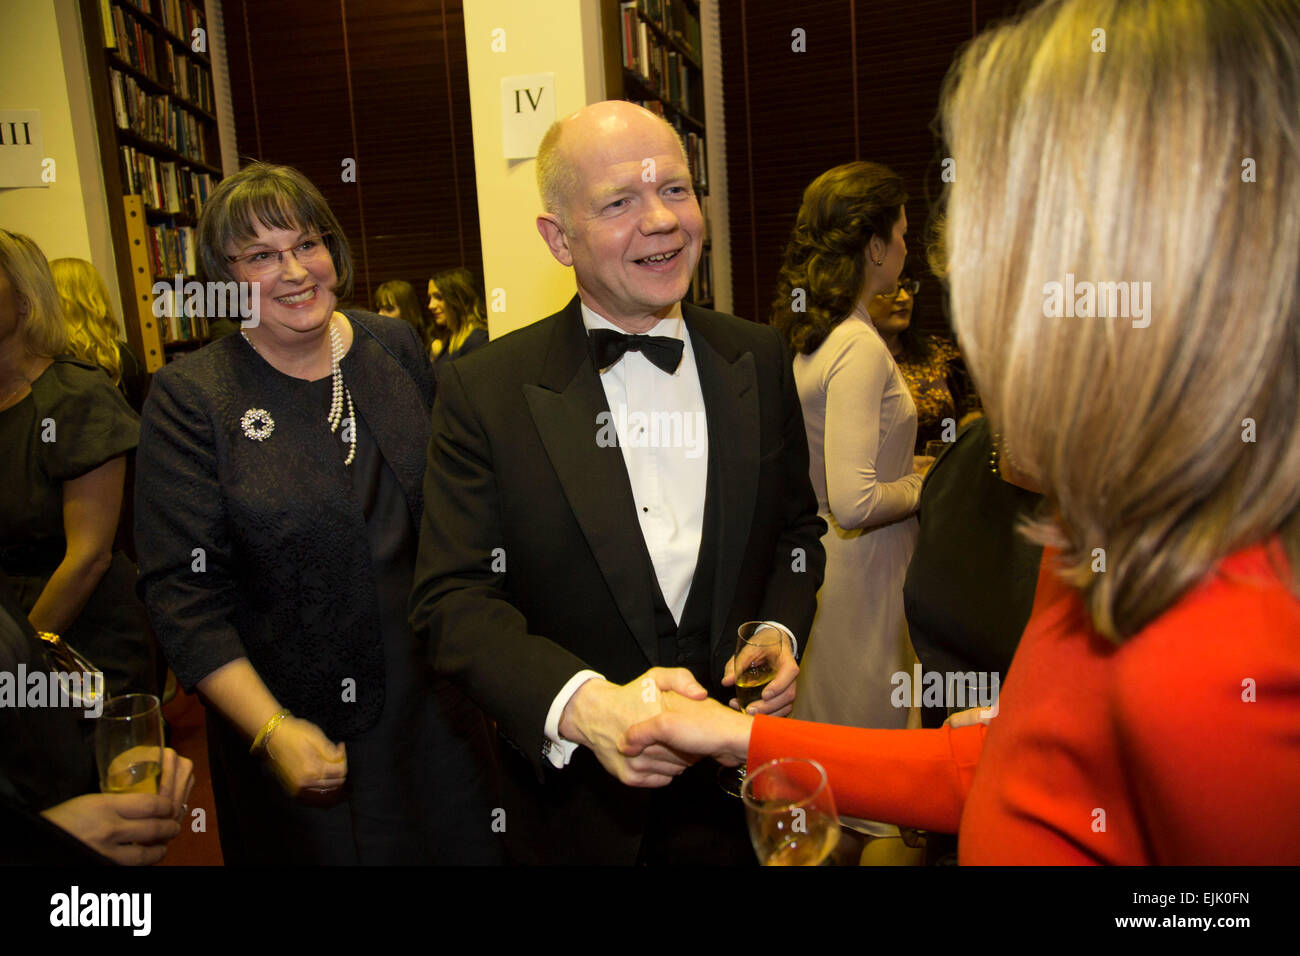 London, UK. Thursday 12th March 2015. International Centre for Research on Women, Champions for Change Awards Dinner event at Banqueting House, Whitehall. HRH Crown Princess Mary and William Hague meet and chat with VIP guests drinks reception in the RUSI library. Stock Photo